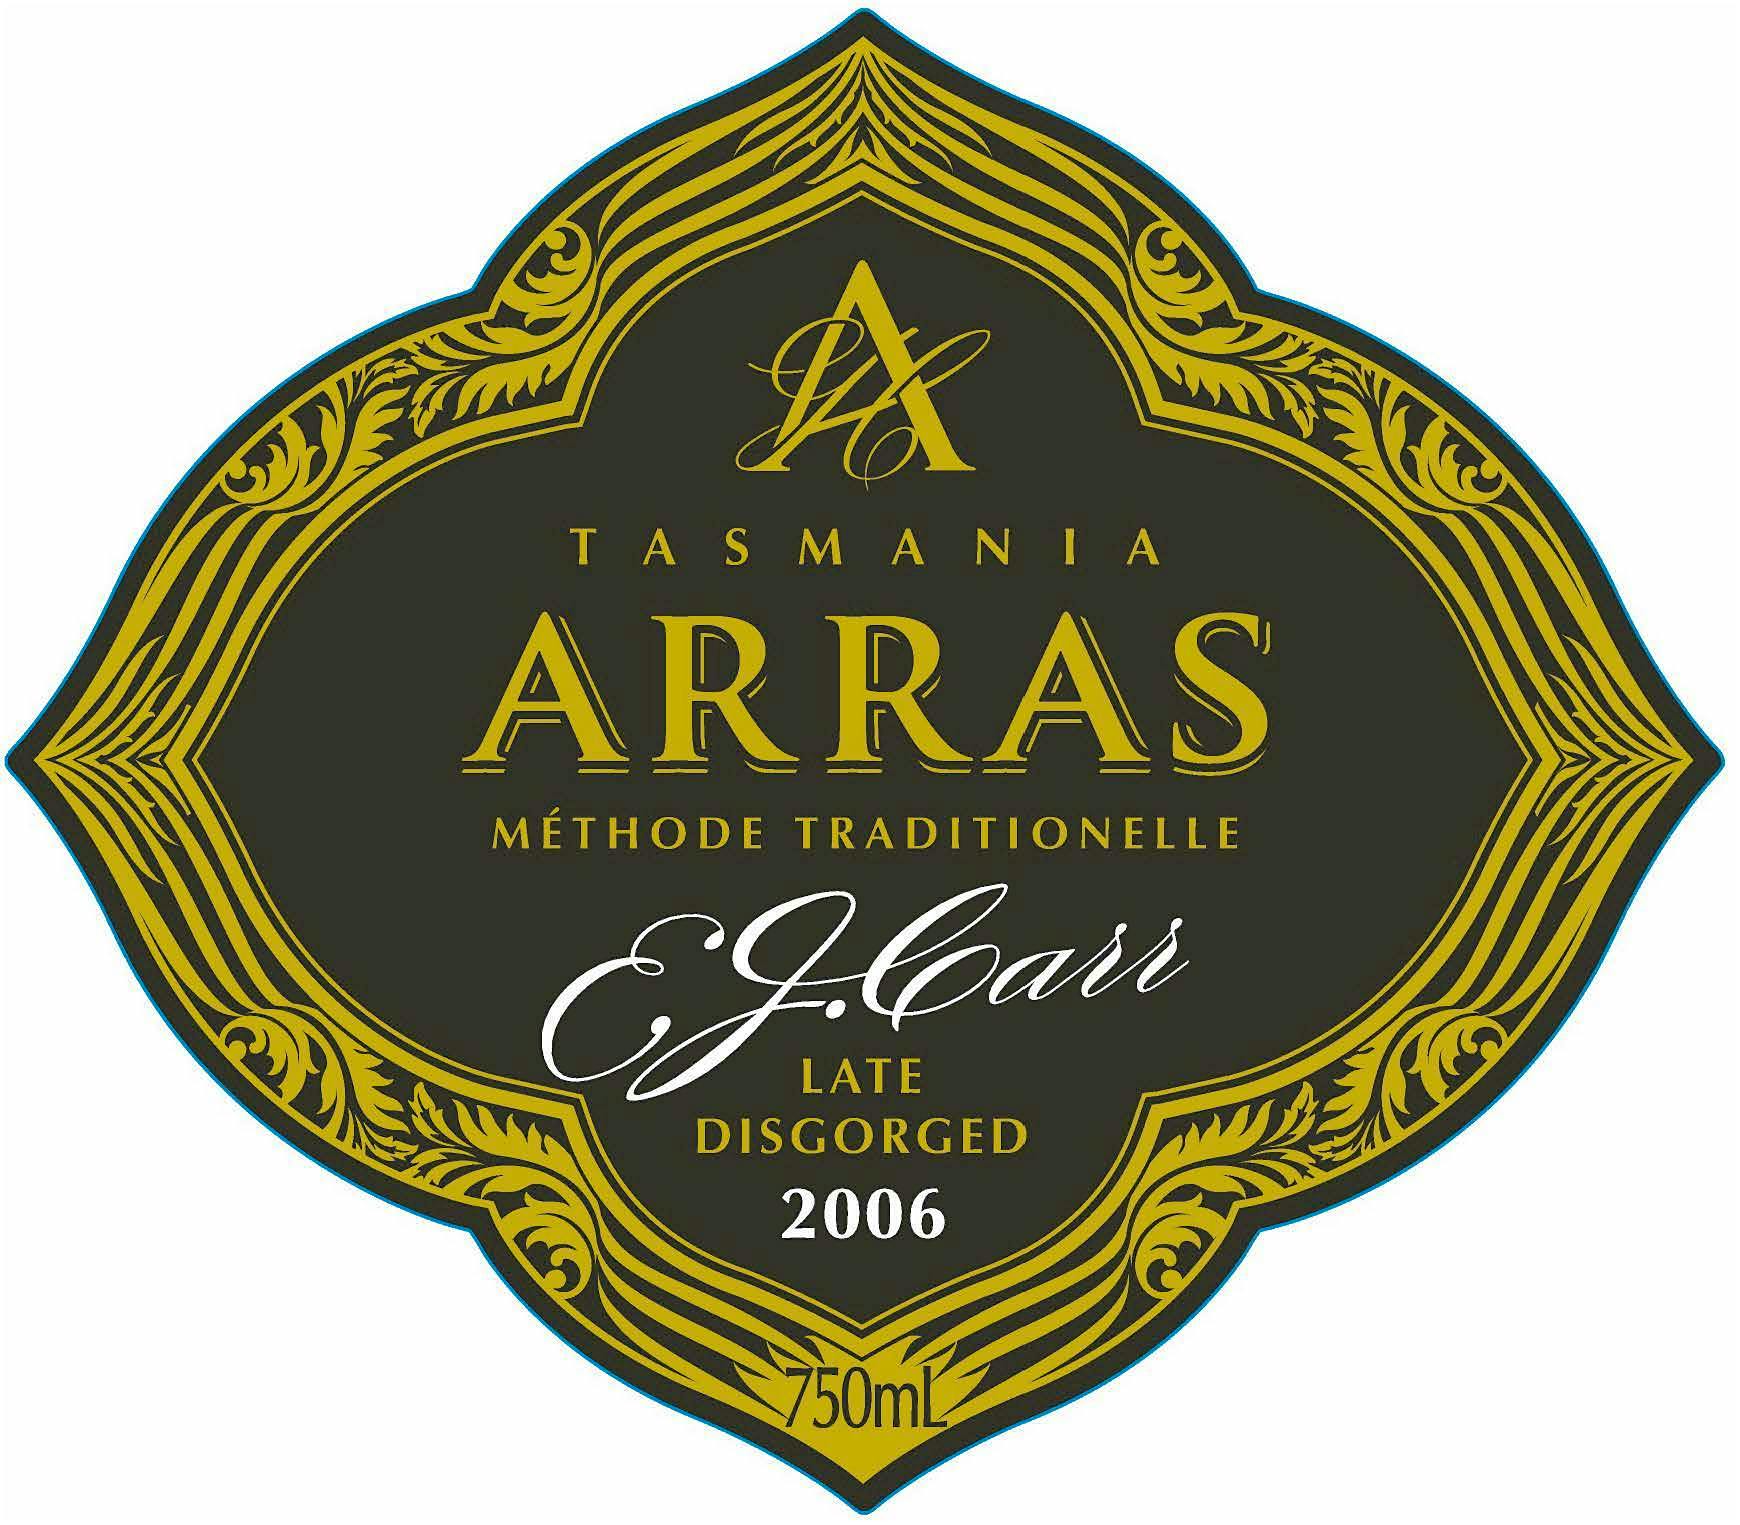 Label for House of Arras